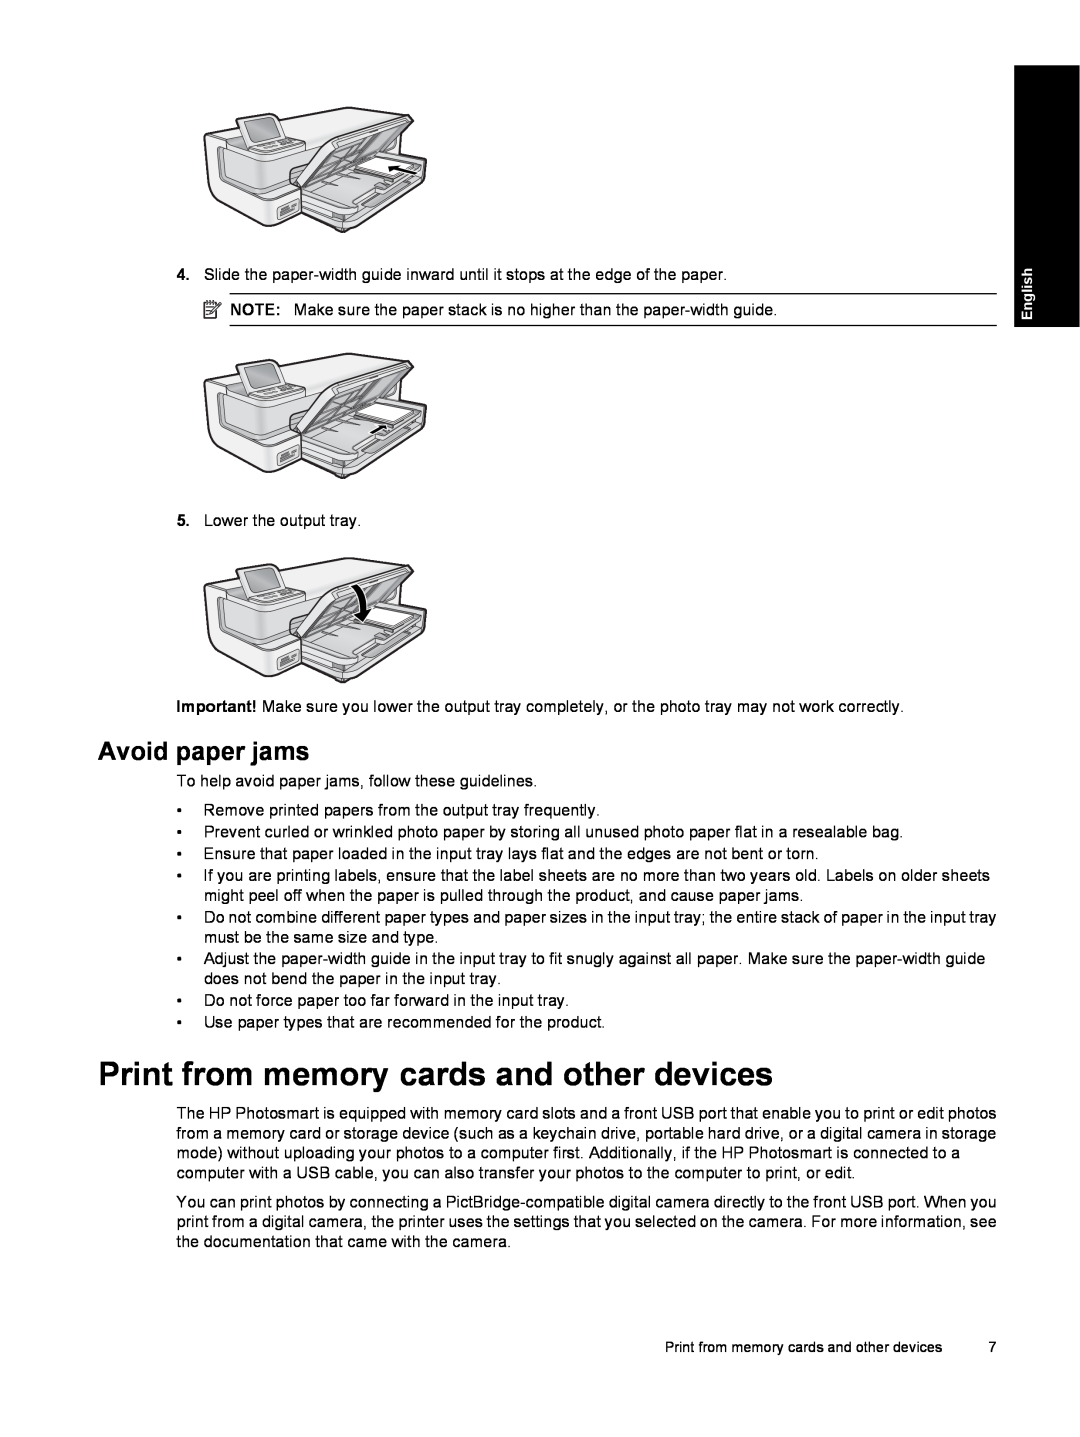 HP B8550 Photo CB981A#B1H manual Print from memory cards and other devices, Avoid paper jams 